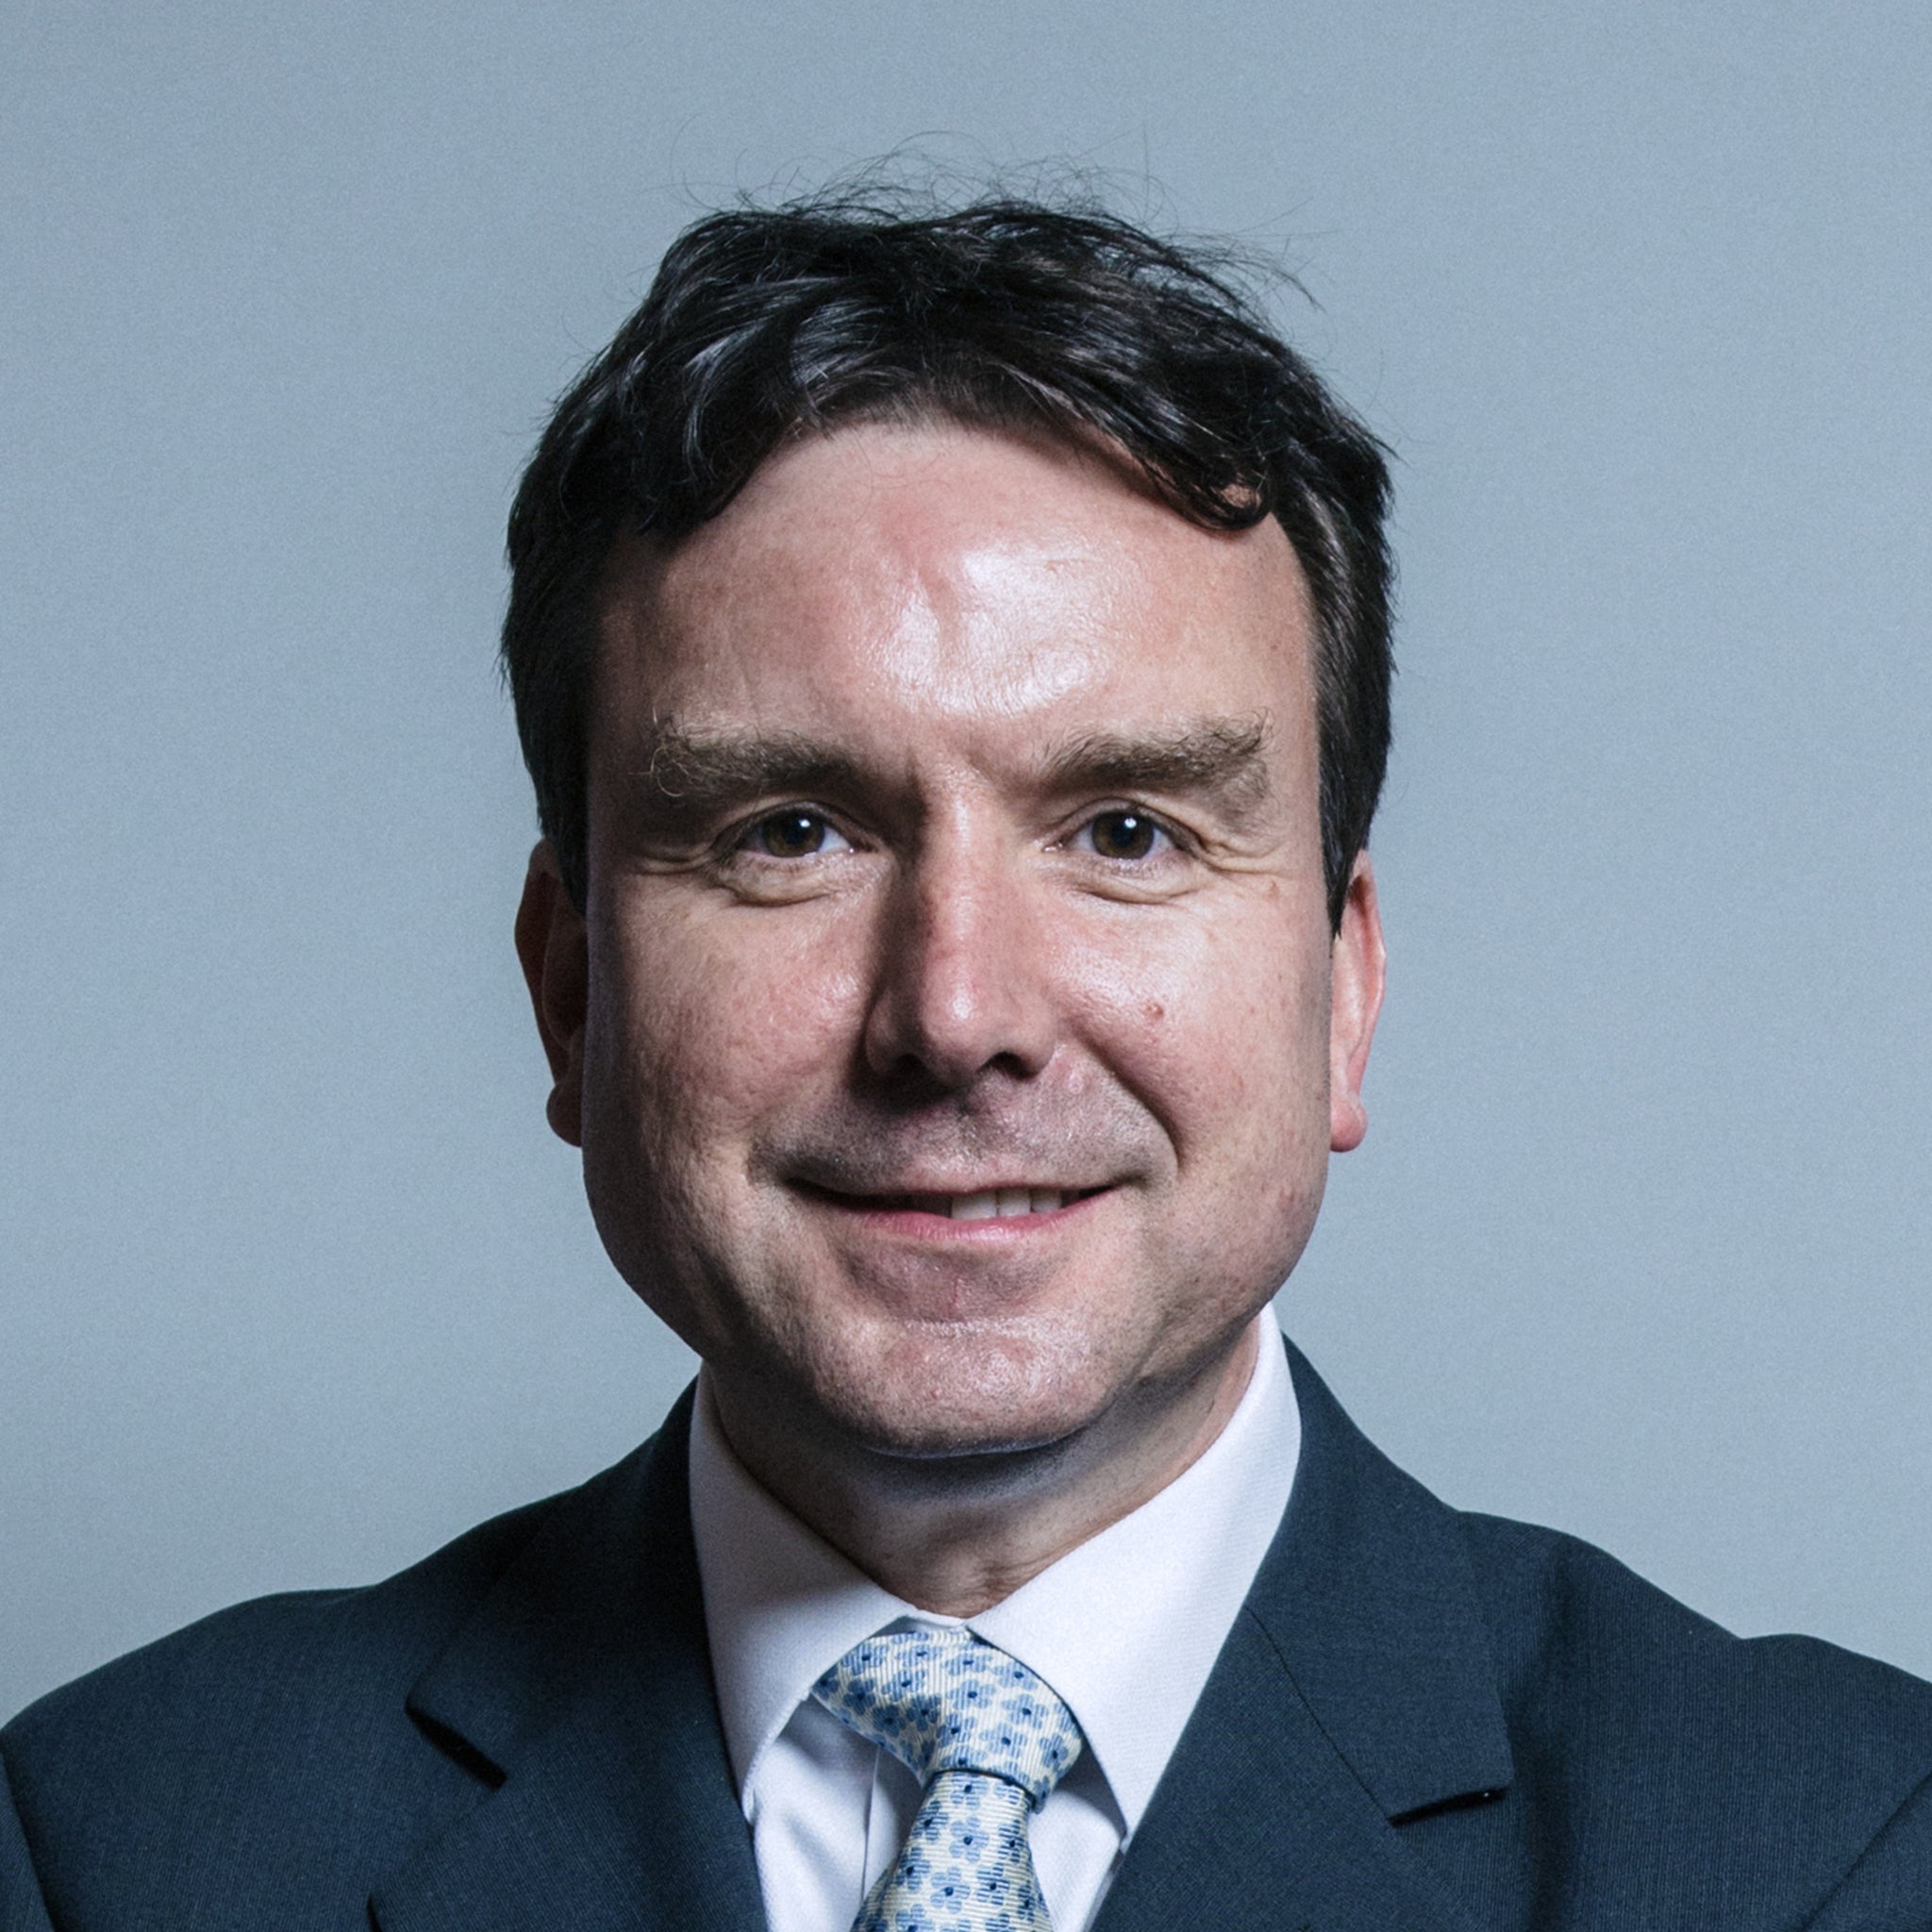 Andrew Griffiths ‘adamantly denied’ rape